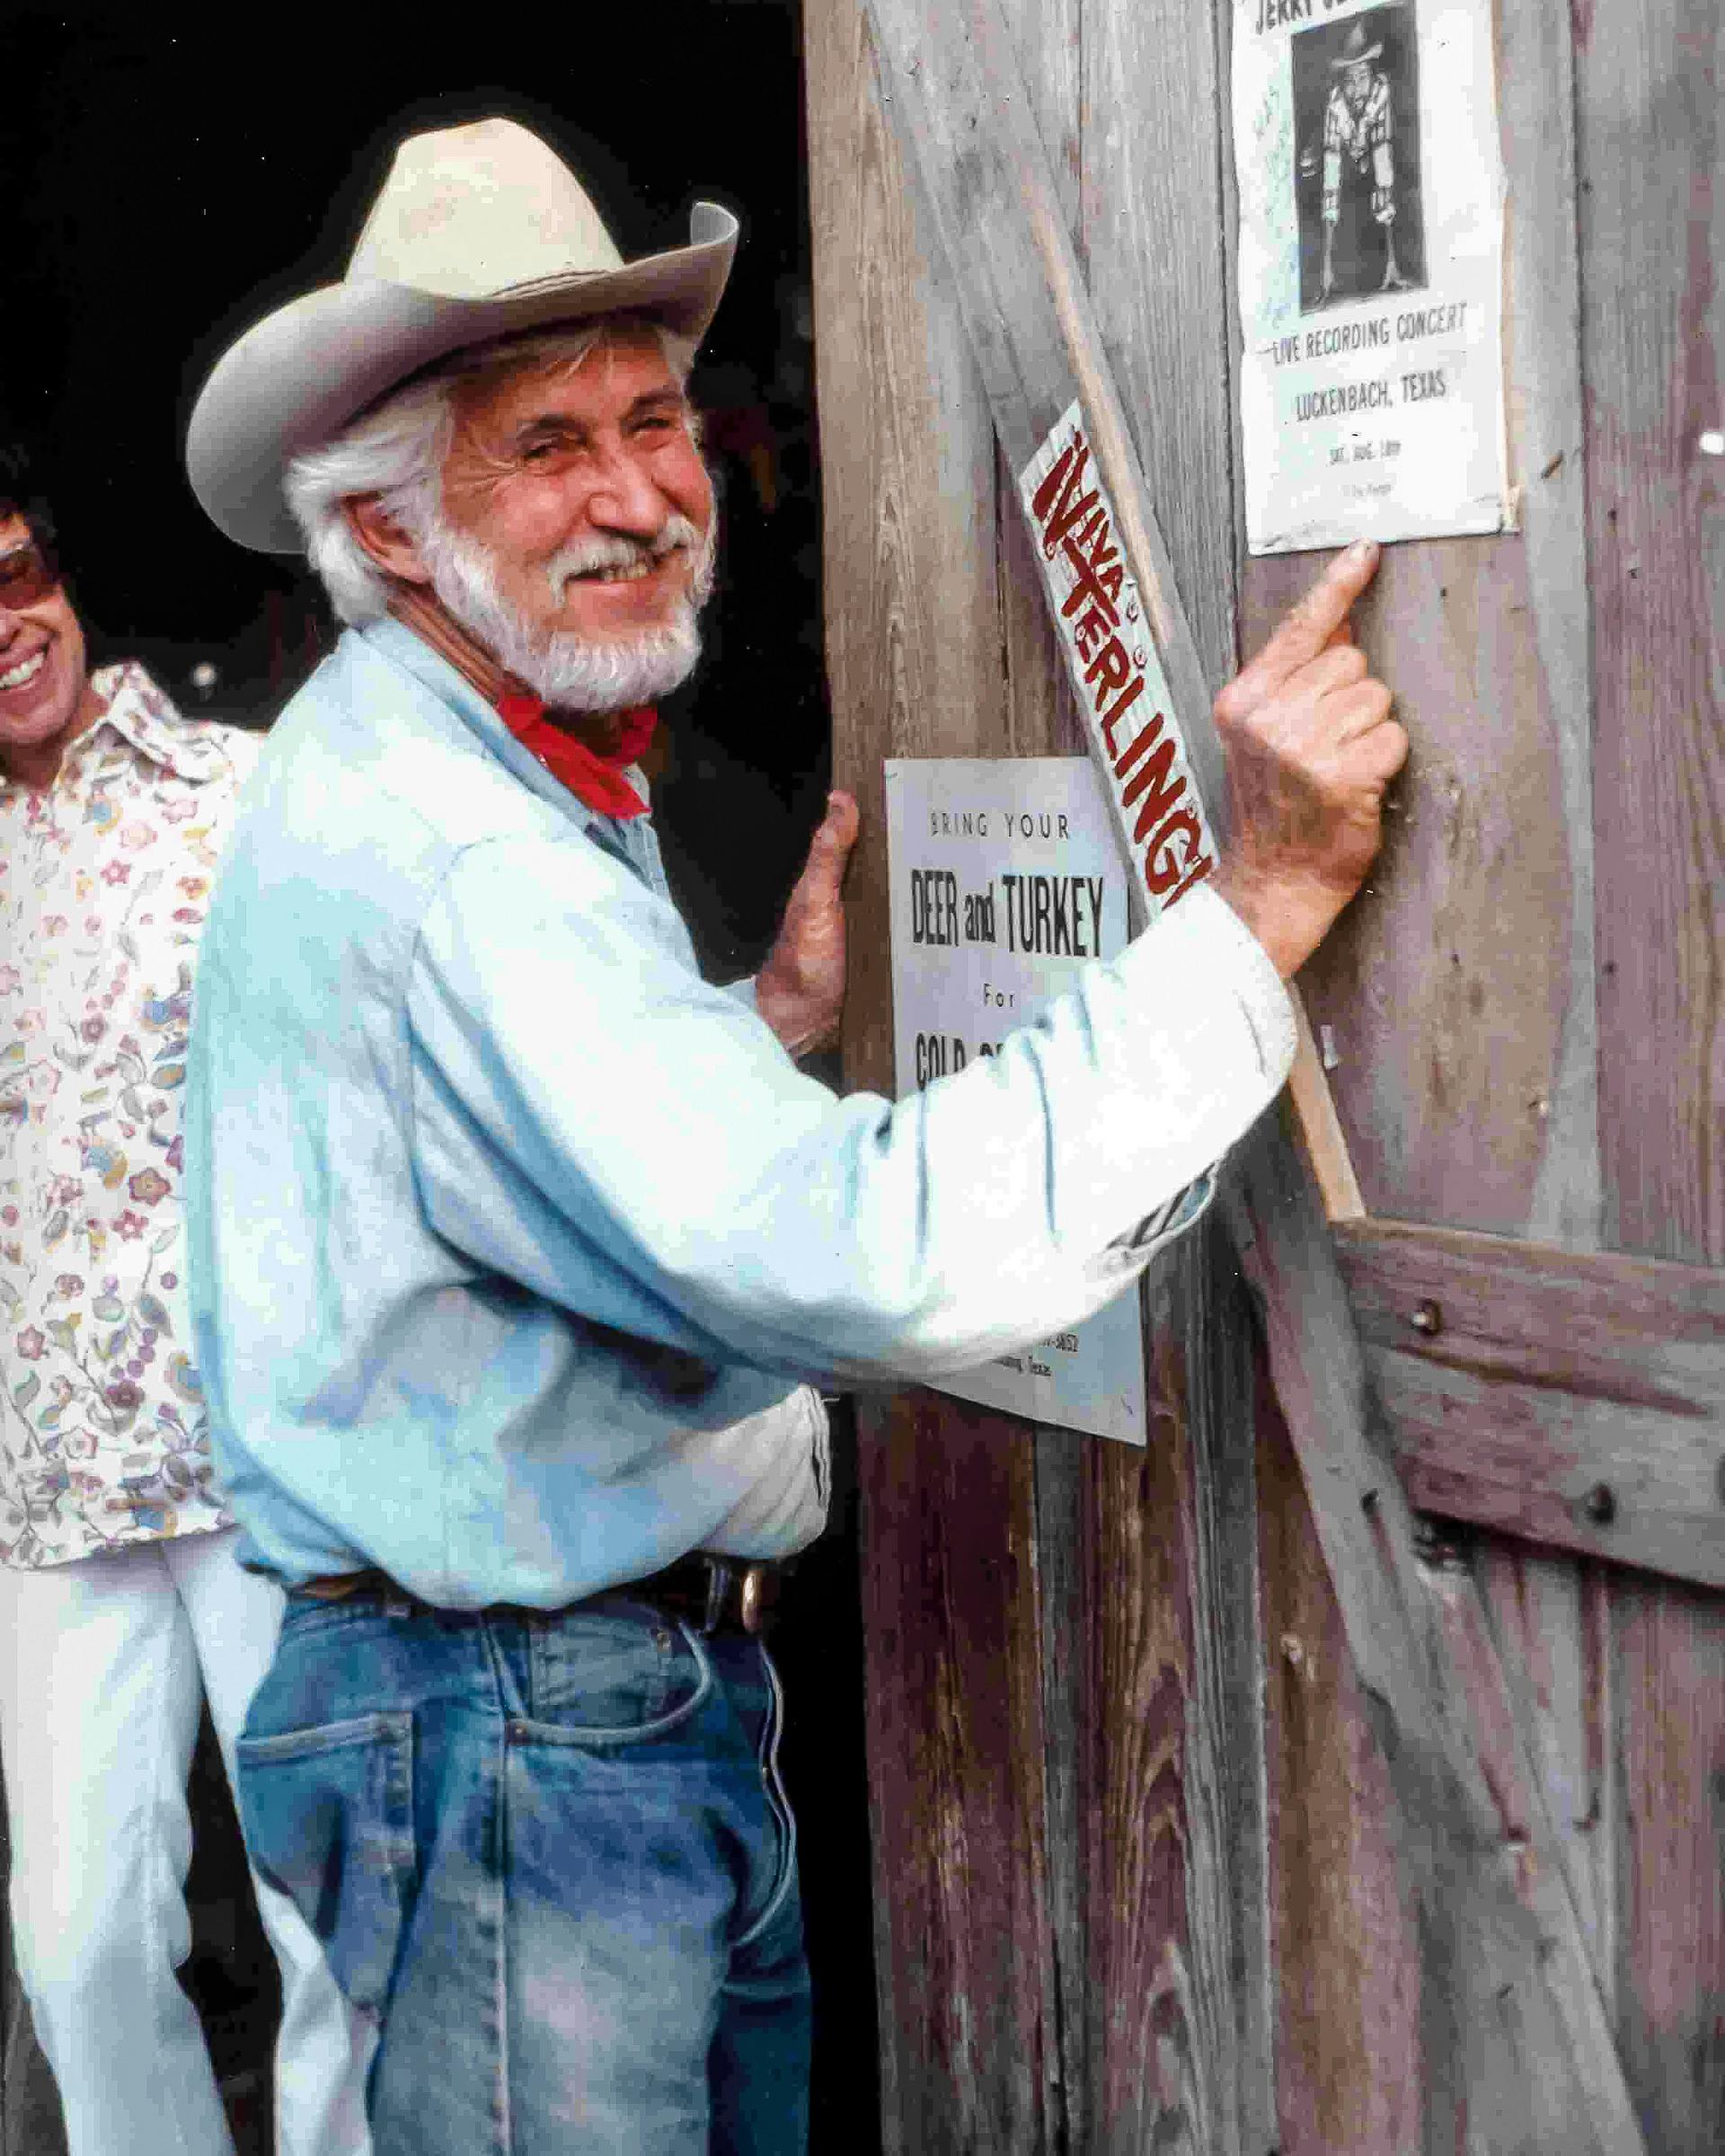 Hondo Crouch pointing to a poster tacked up on a wooden door. 